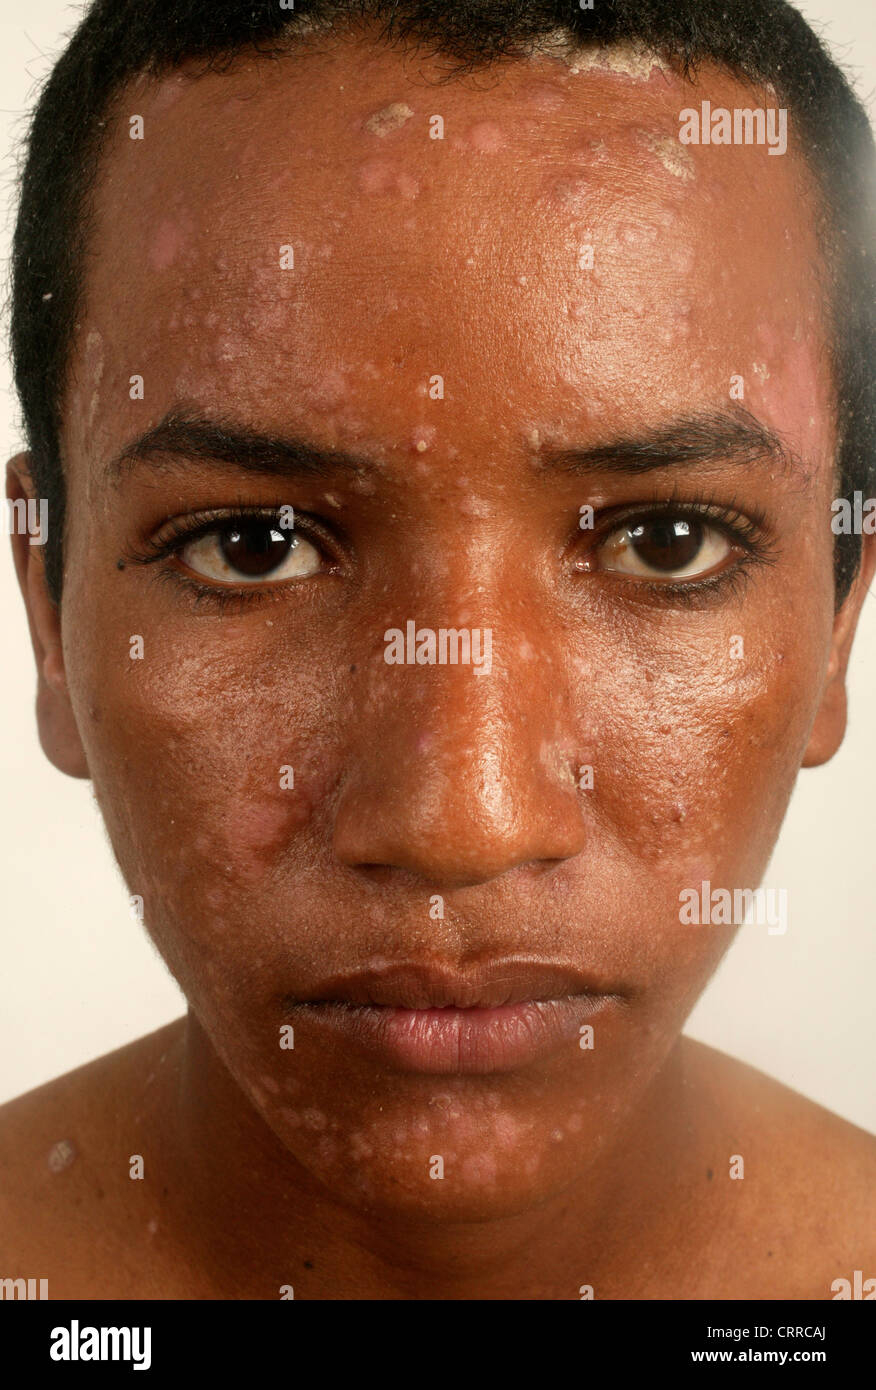 A young man with a fungal skin condition. Stock Photo